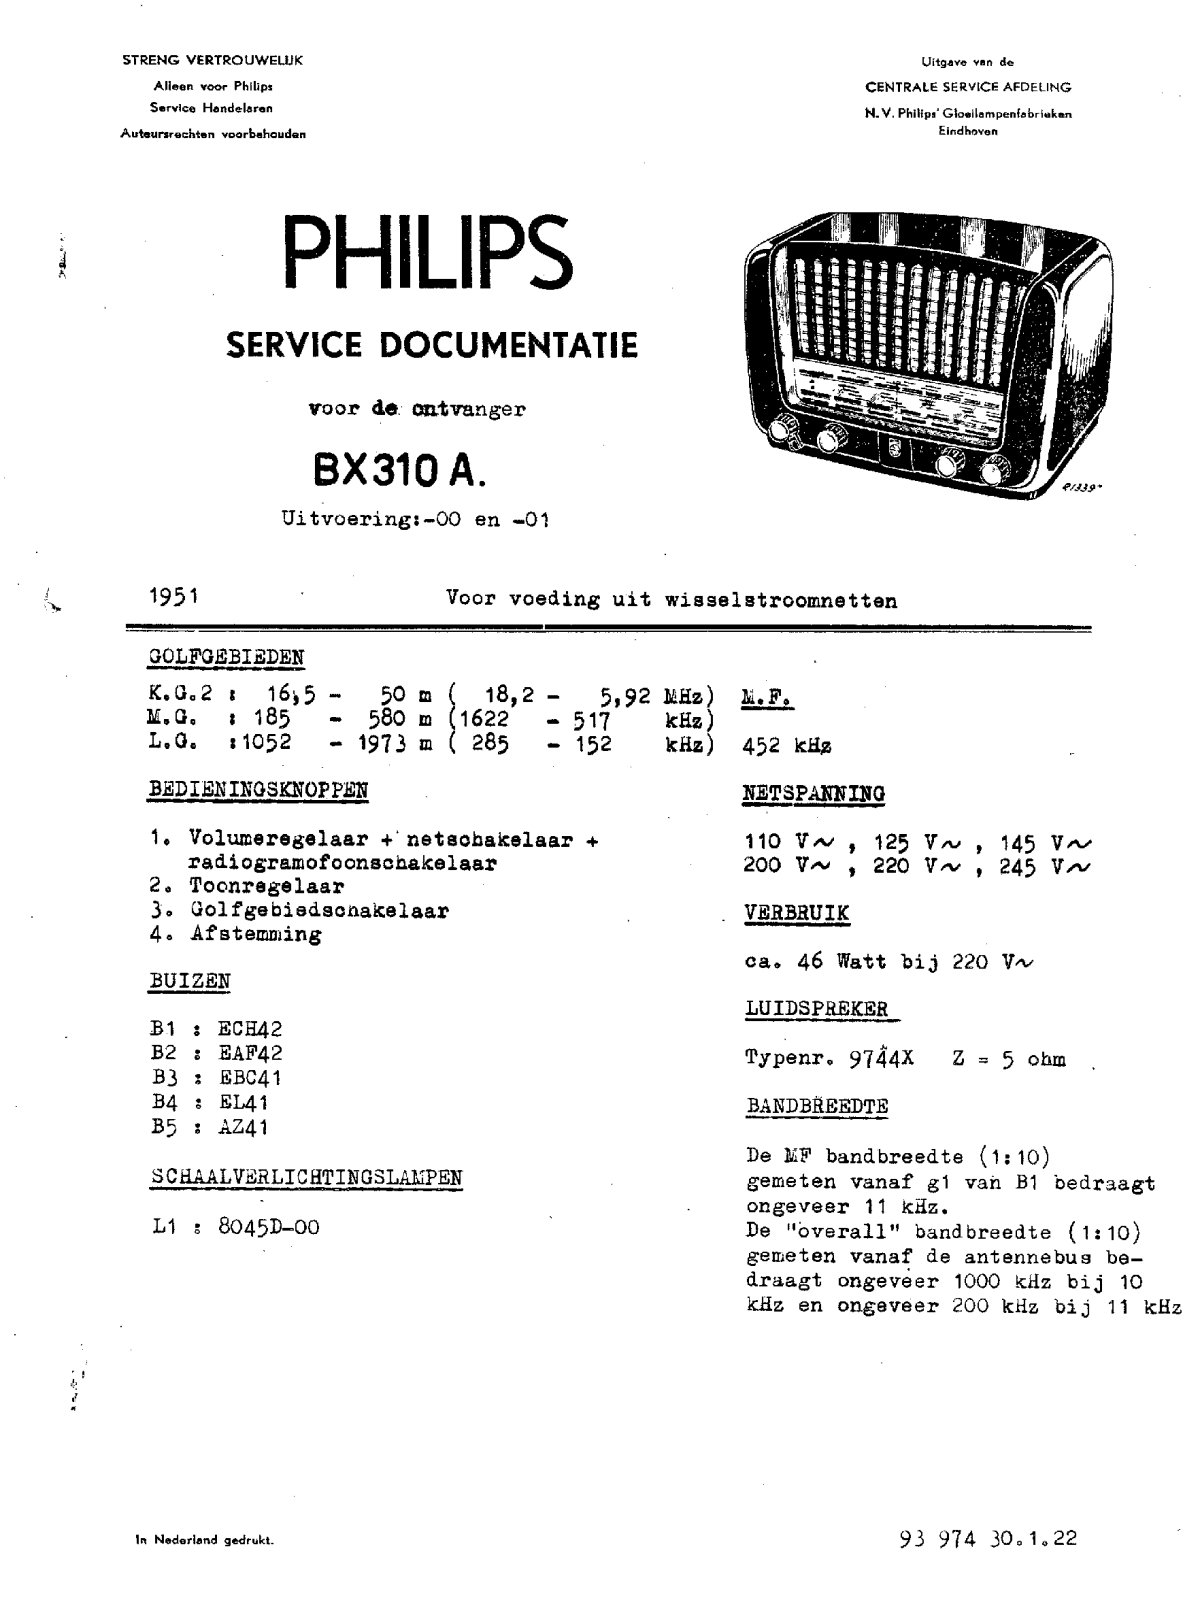 Philips BX-310-A Service Manual